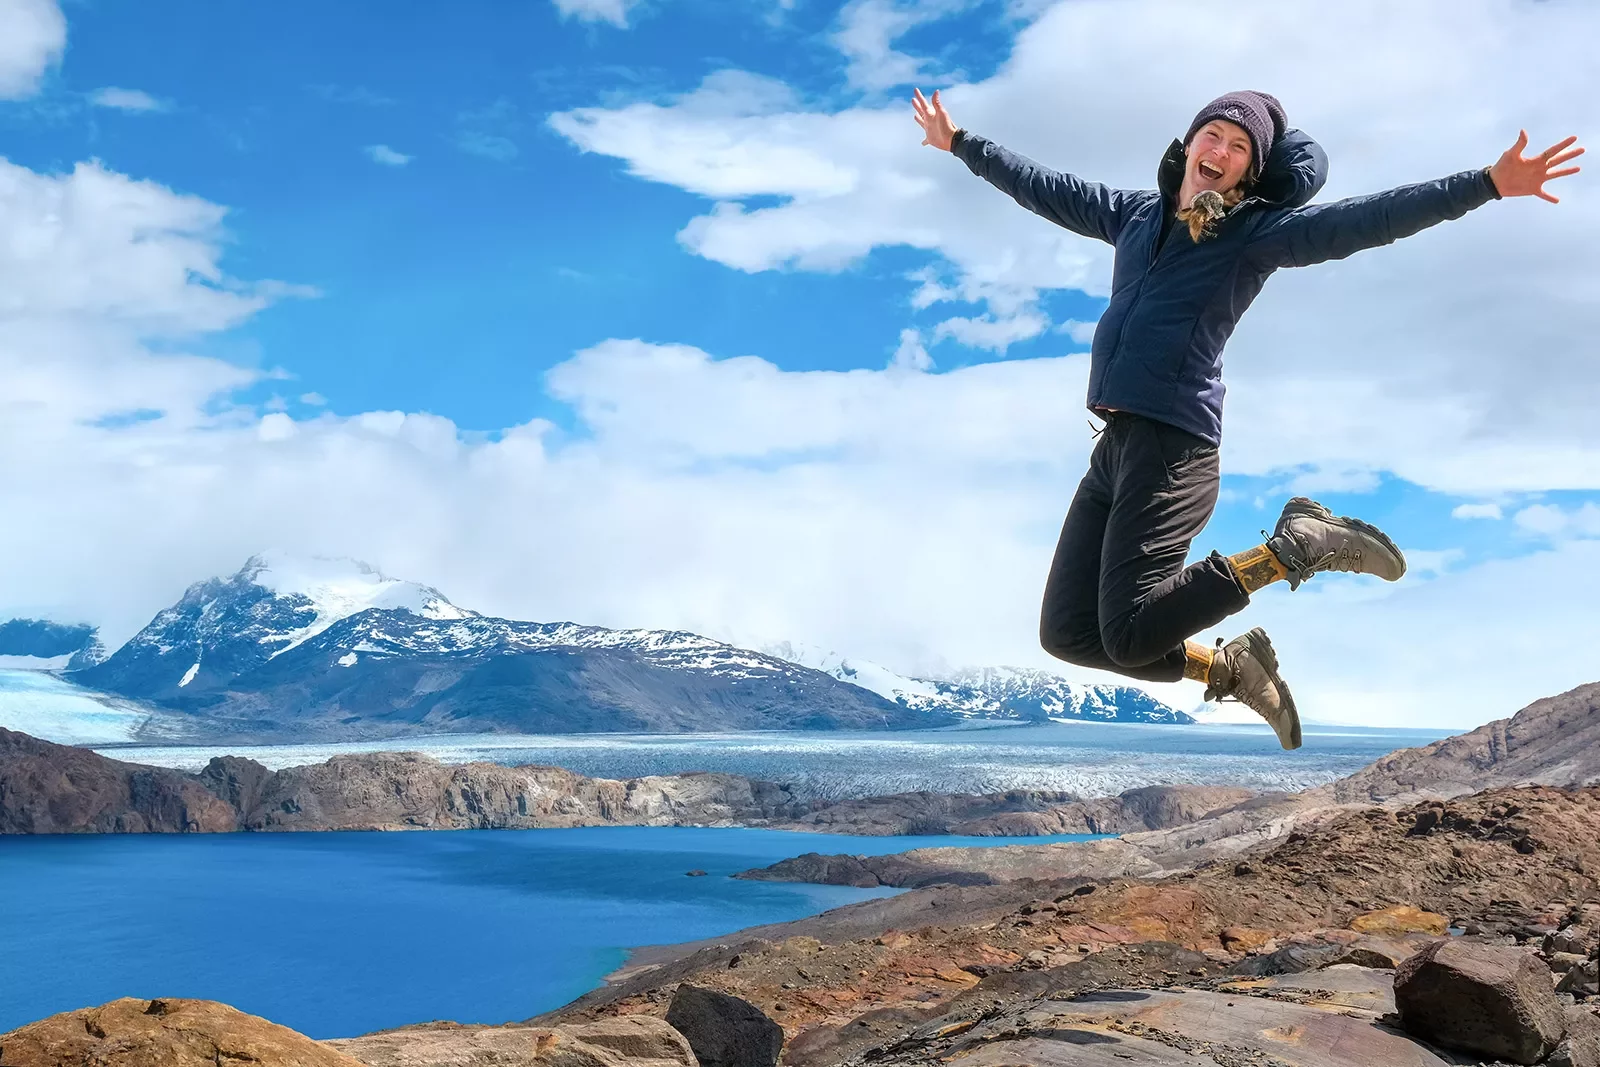 Guest on cliffside, jumping for joy. Lake, snowy mountains behind her.